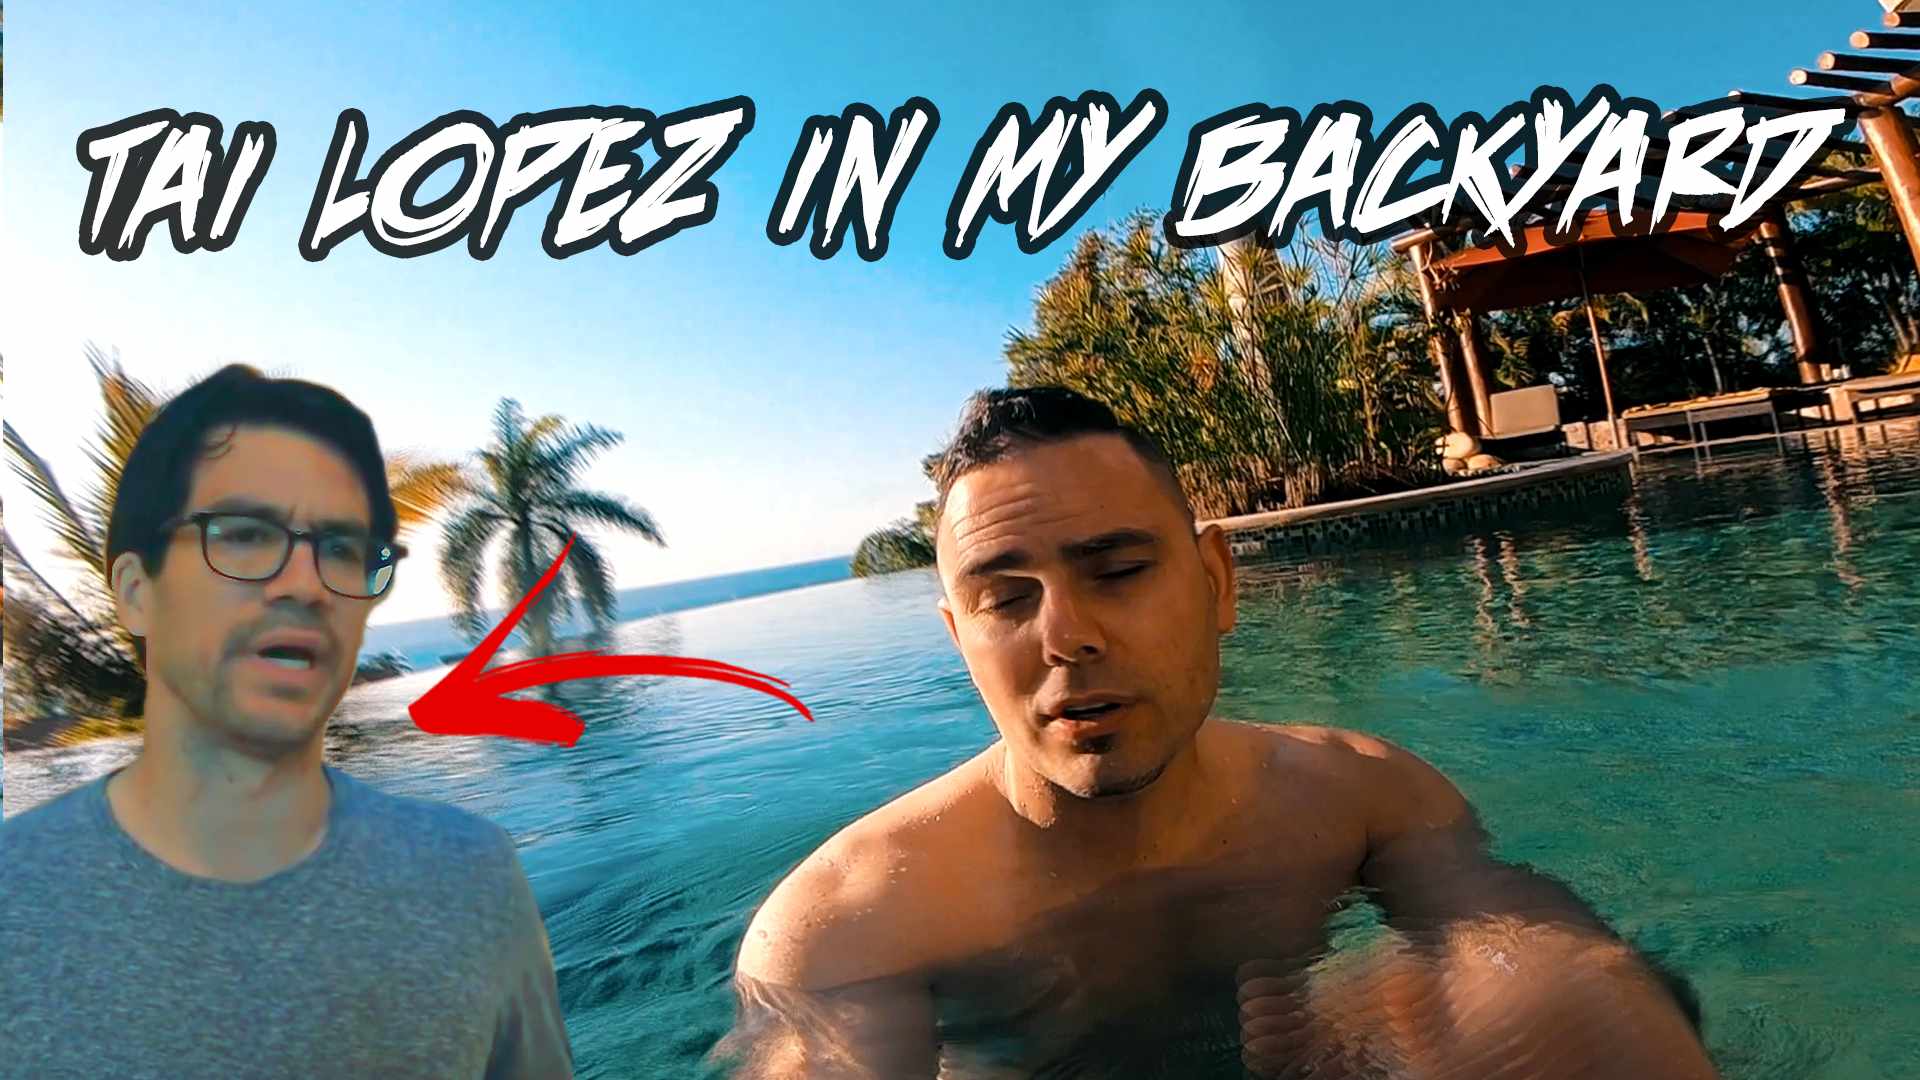 HERE IN MY BACKYARD (Mexico Version) with Tai Lopez (Here In My Garage Parody)